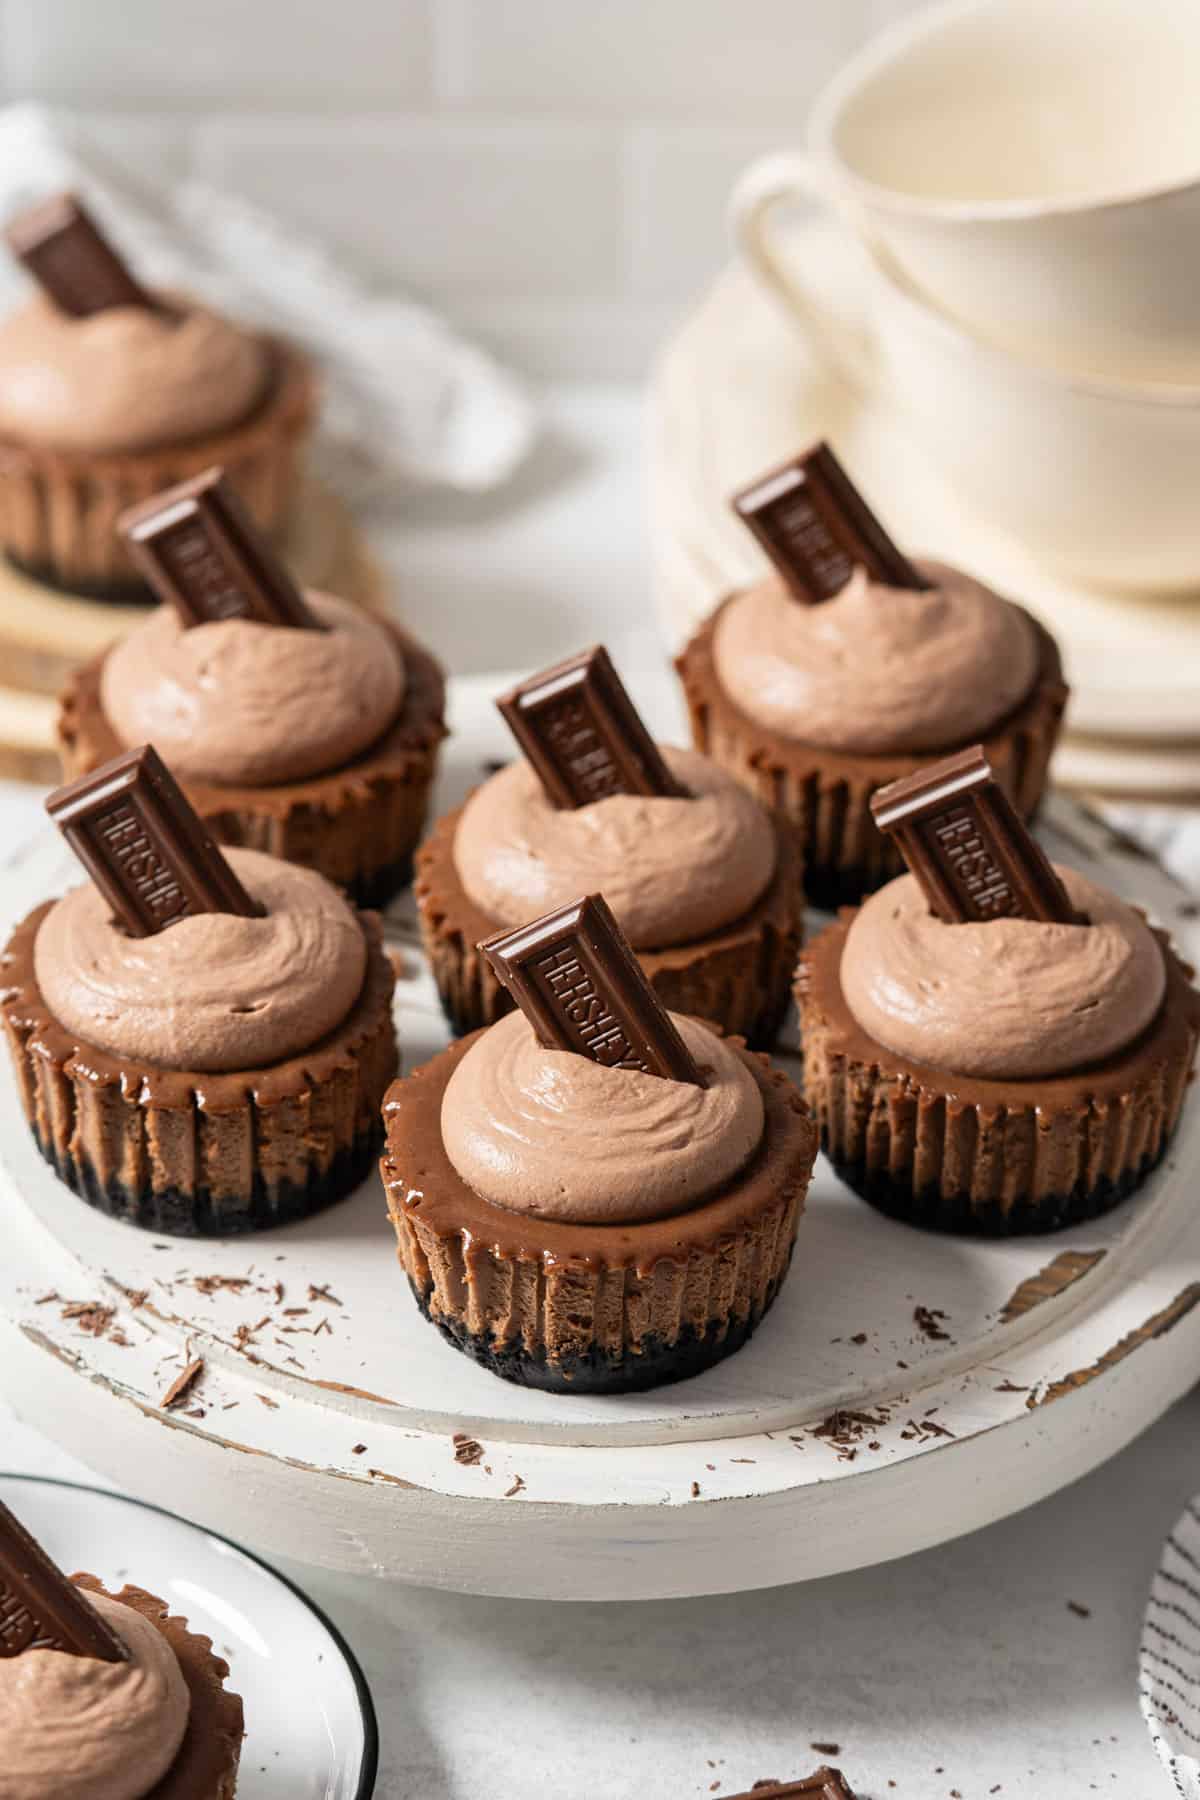 Mini chocolate cheesecakes on a cake stand.